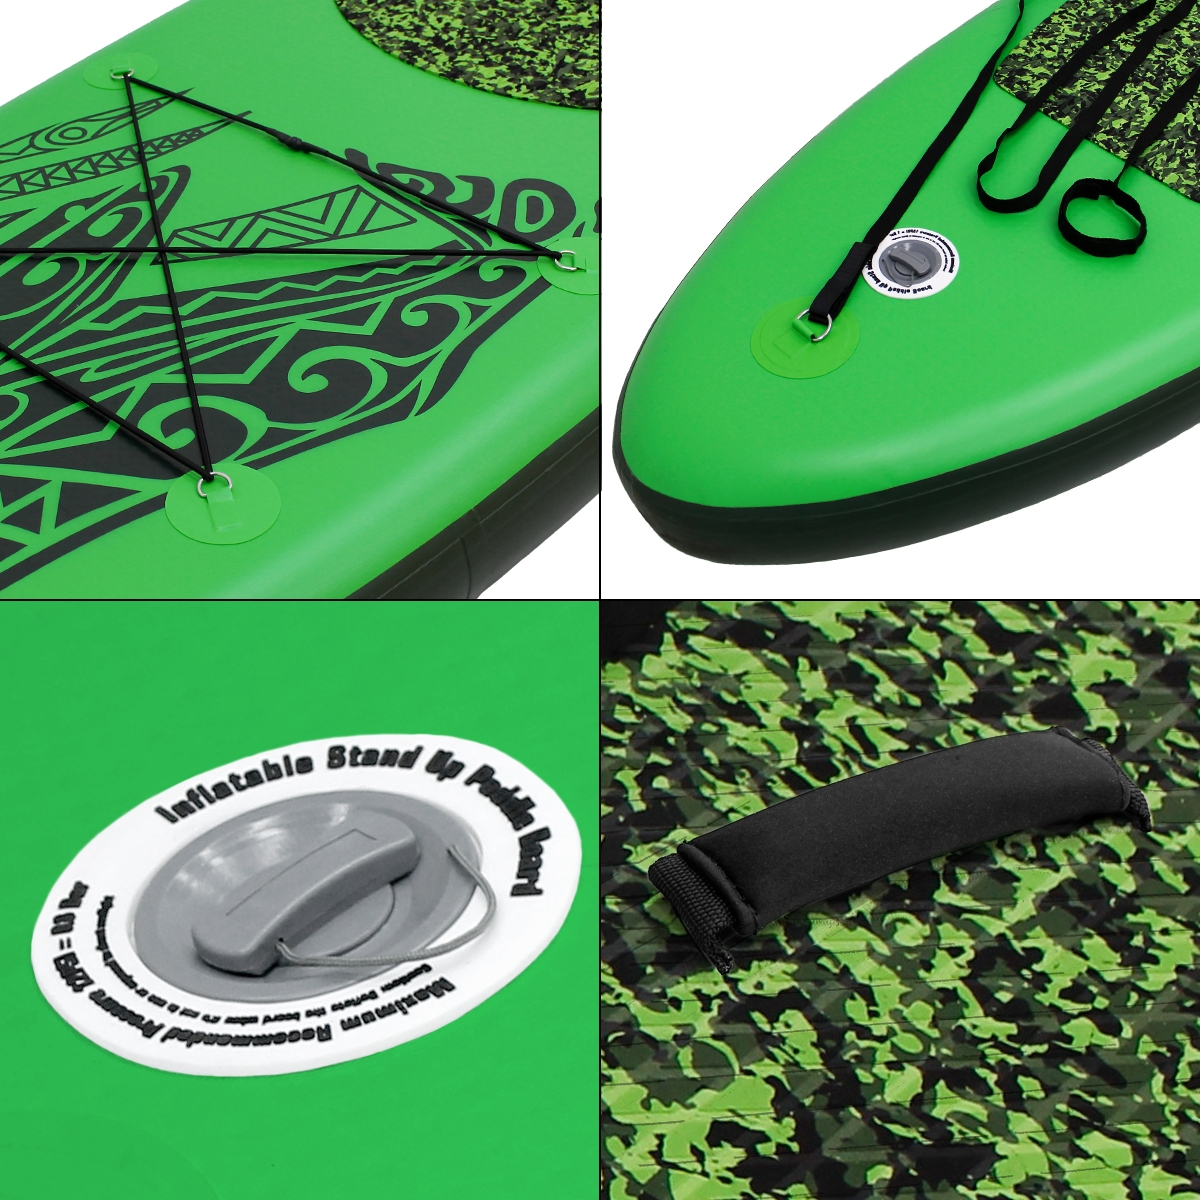 Board Paddle Grün Stand Paddle, Green ECD-GERMANY Up Up Stand